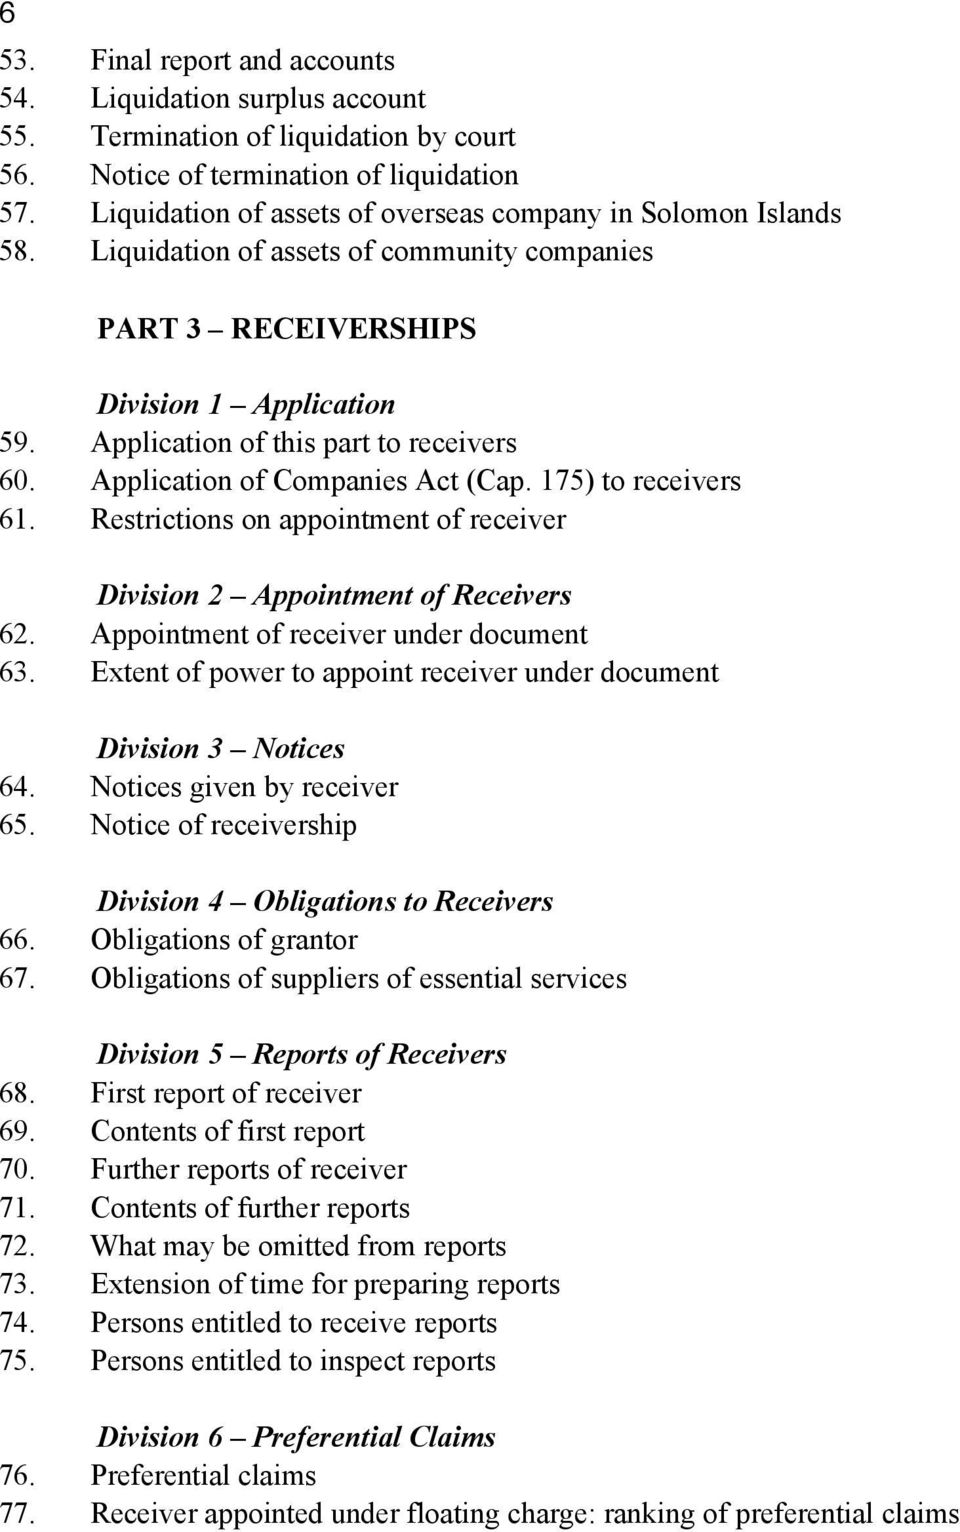 Application of Companies Act (Cap. 175) to receivers 61. Restrictions on appointment of receiver Division 2 Appointment of Receivers 62. Appointment of receiver under document 63.